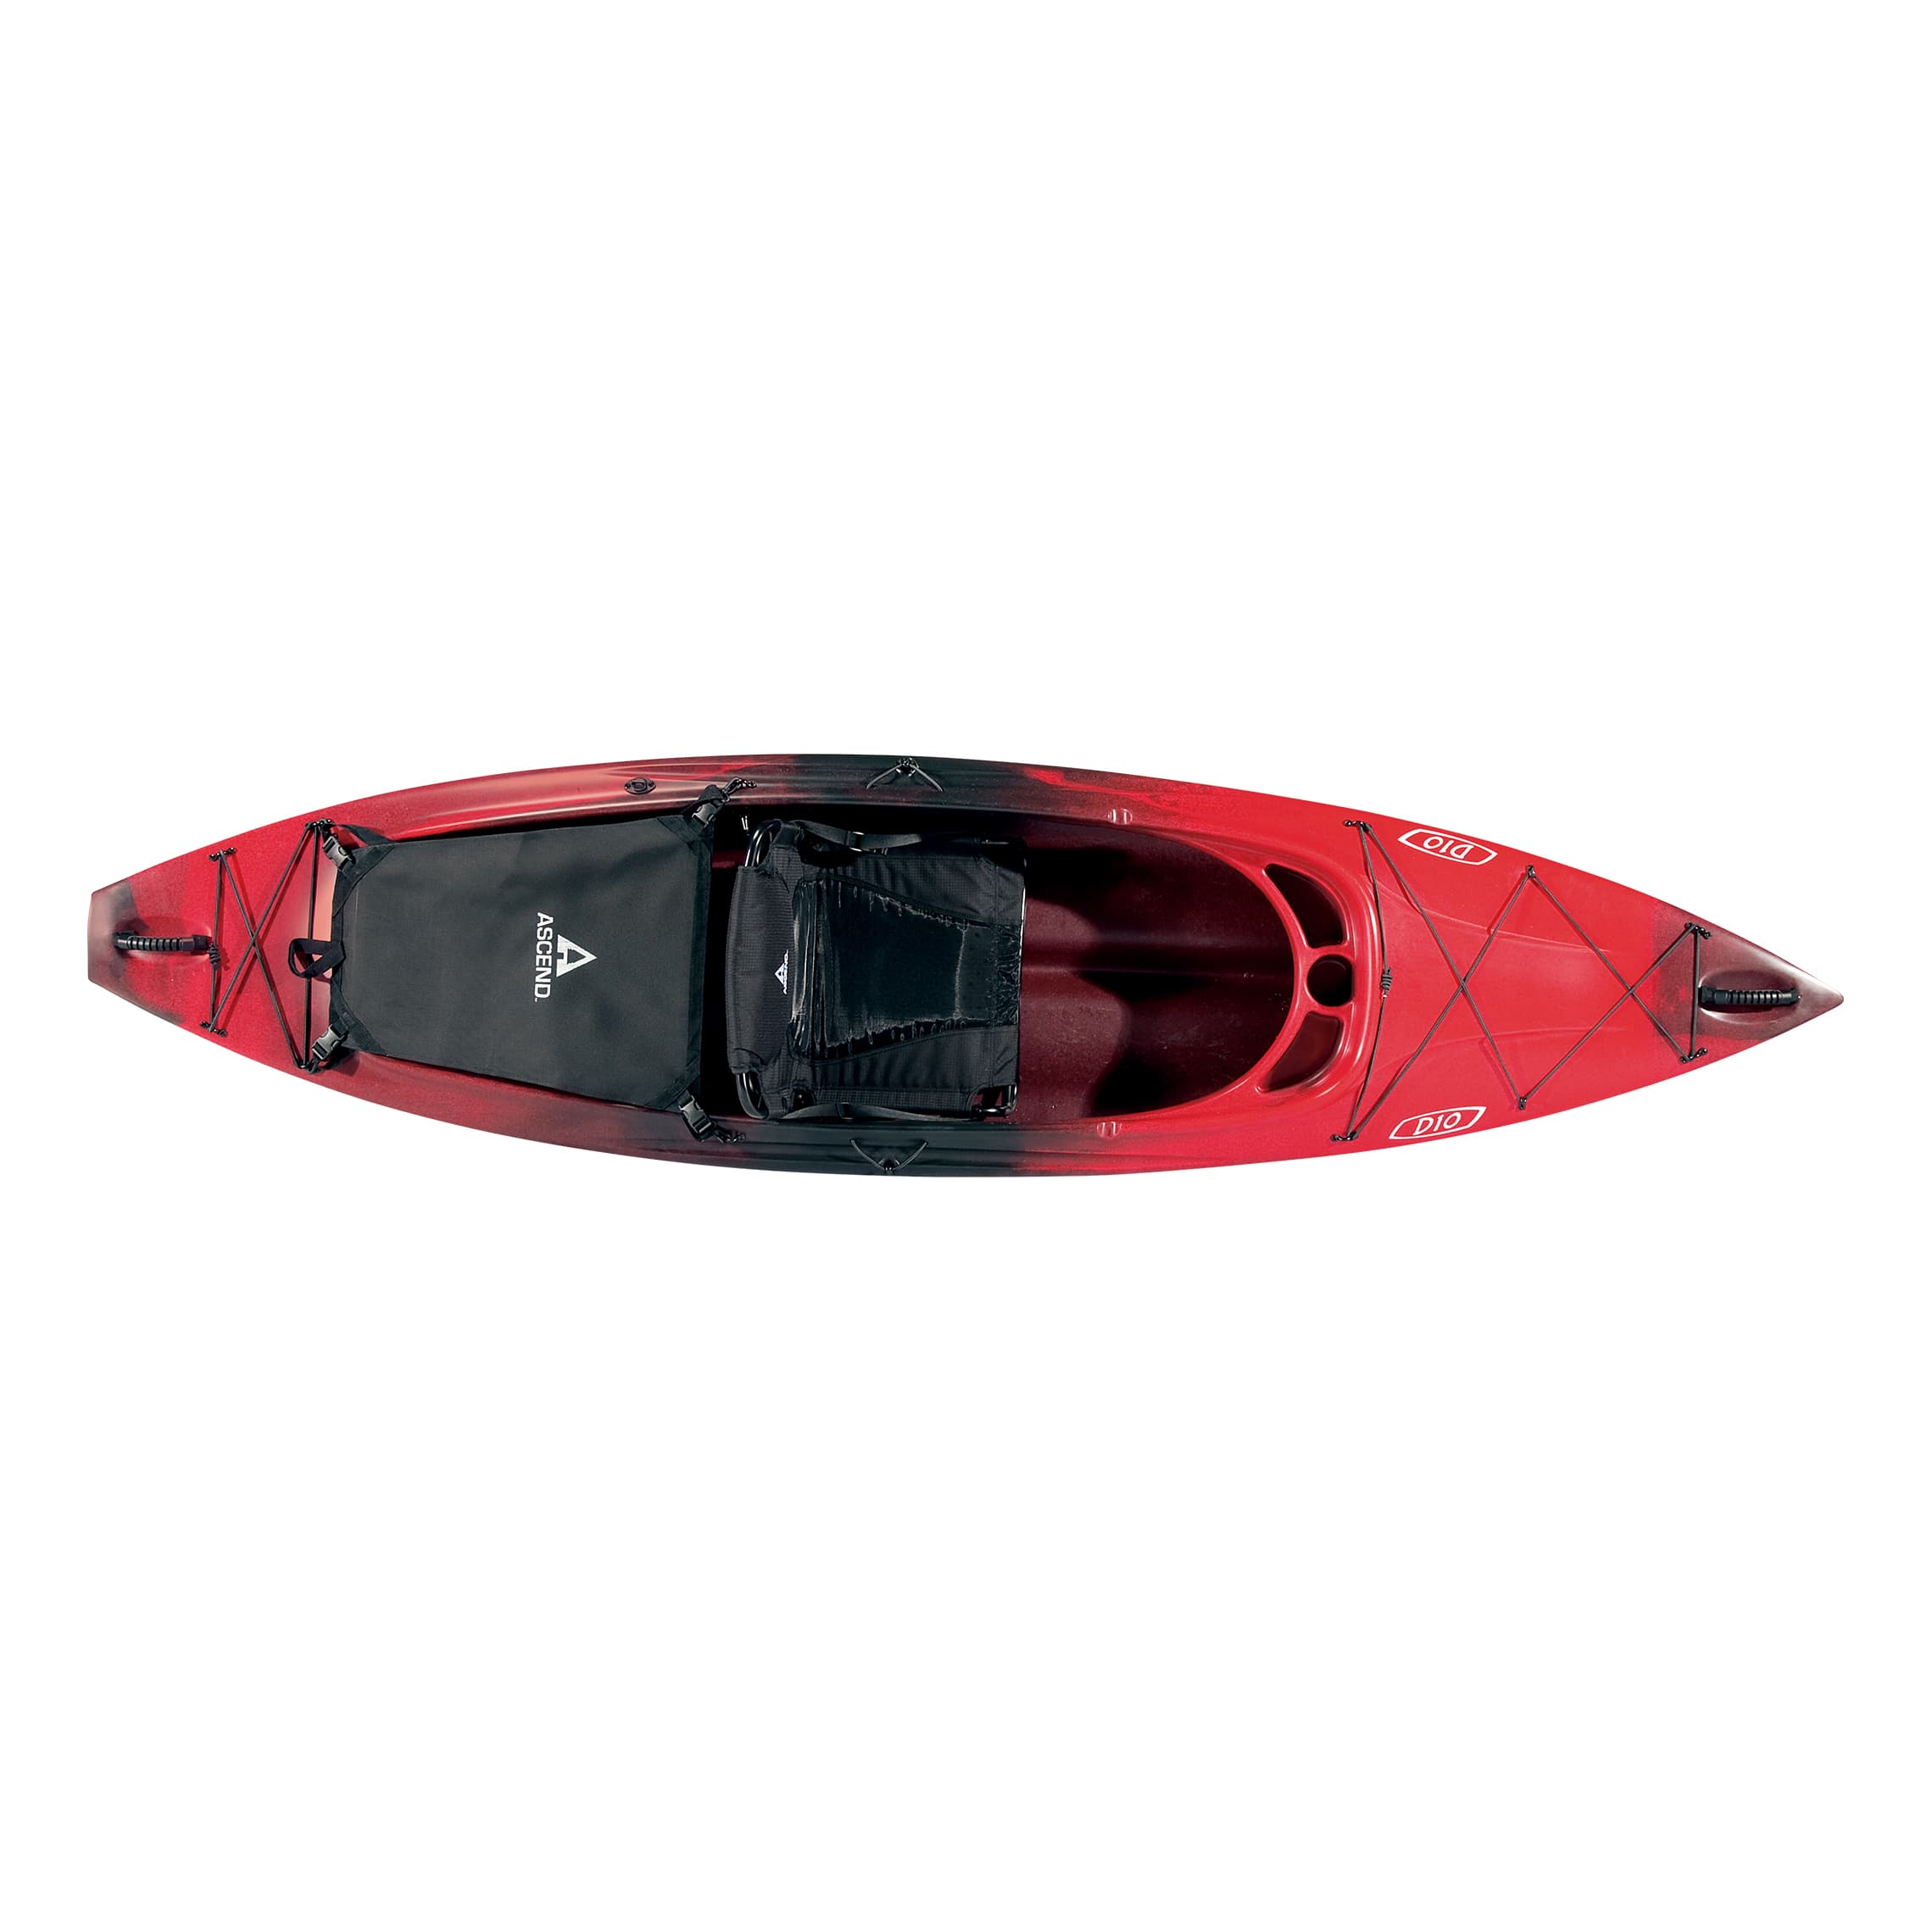 ASCEND® D10 Sit-In Kayak - Red/Black - Overhead View